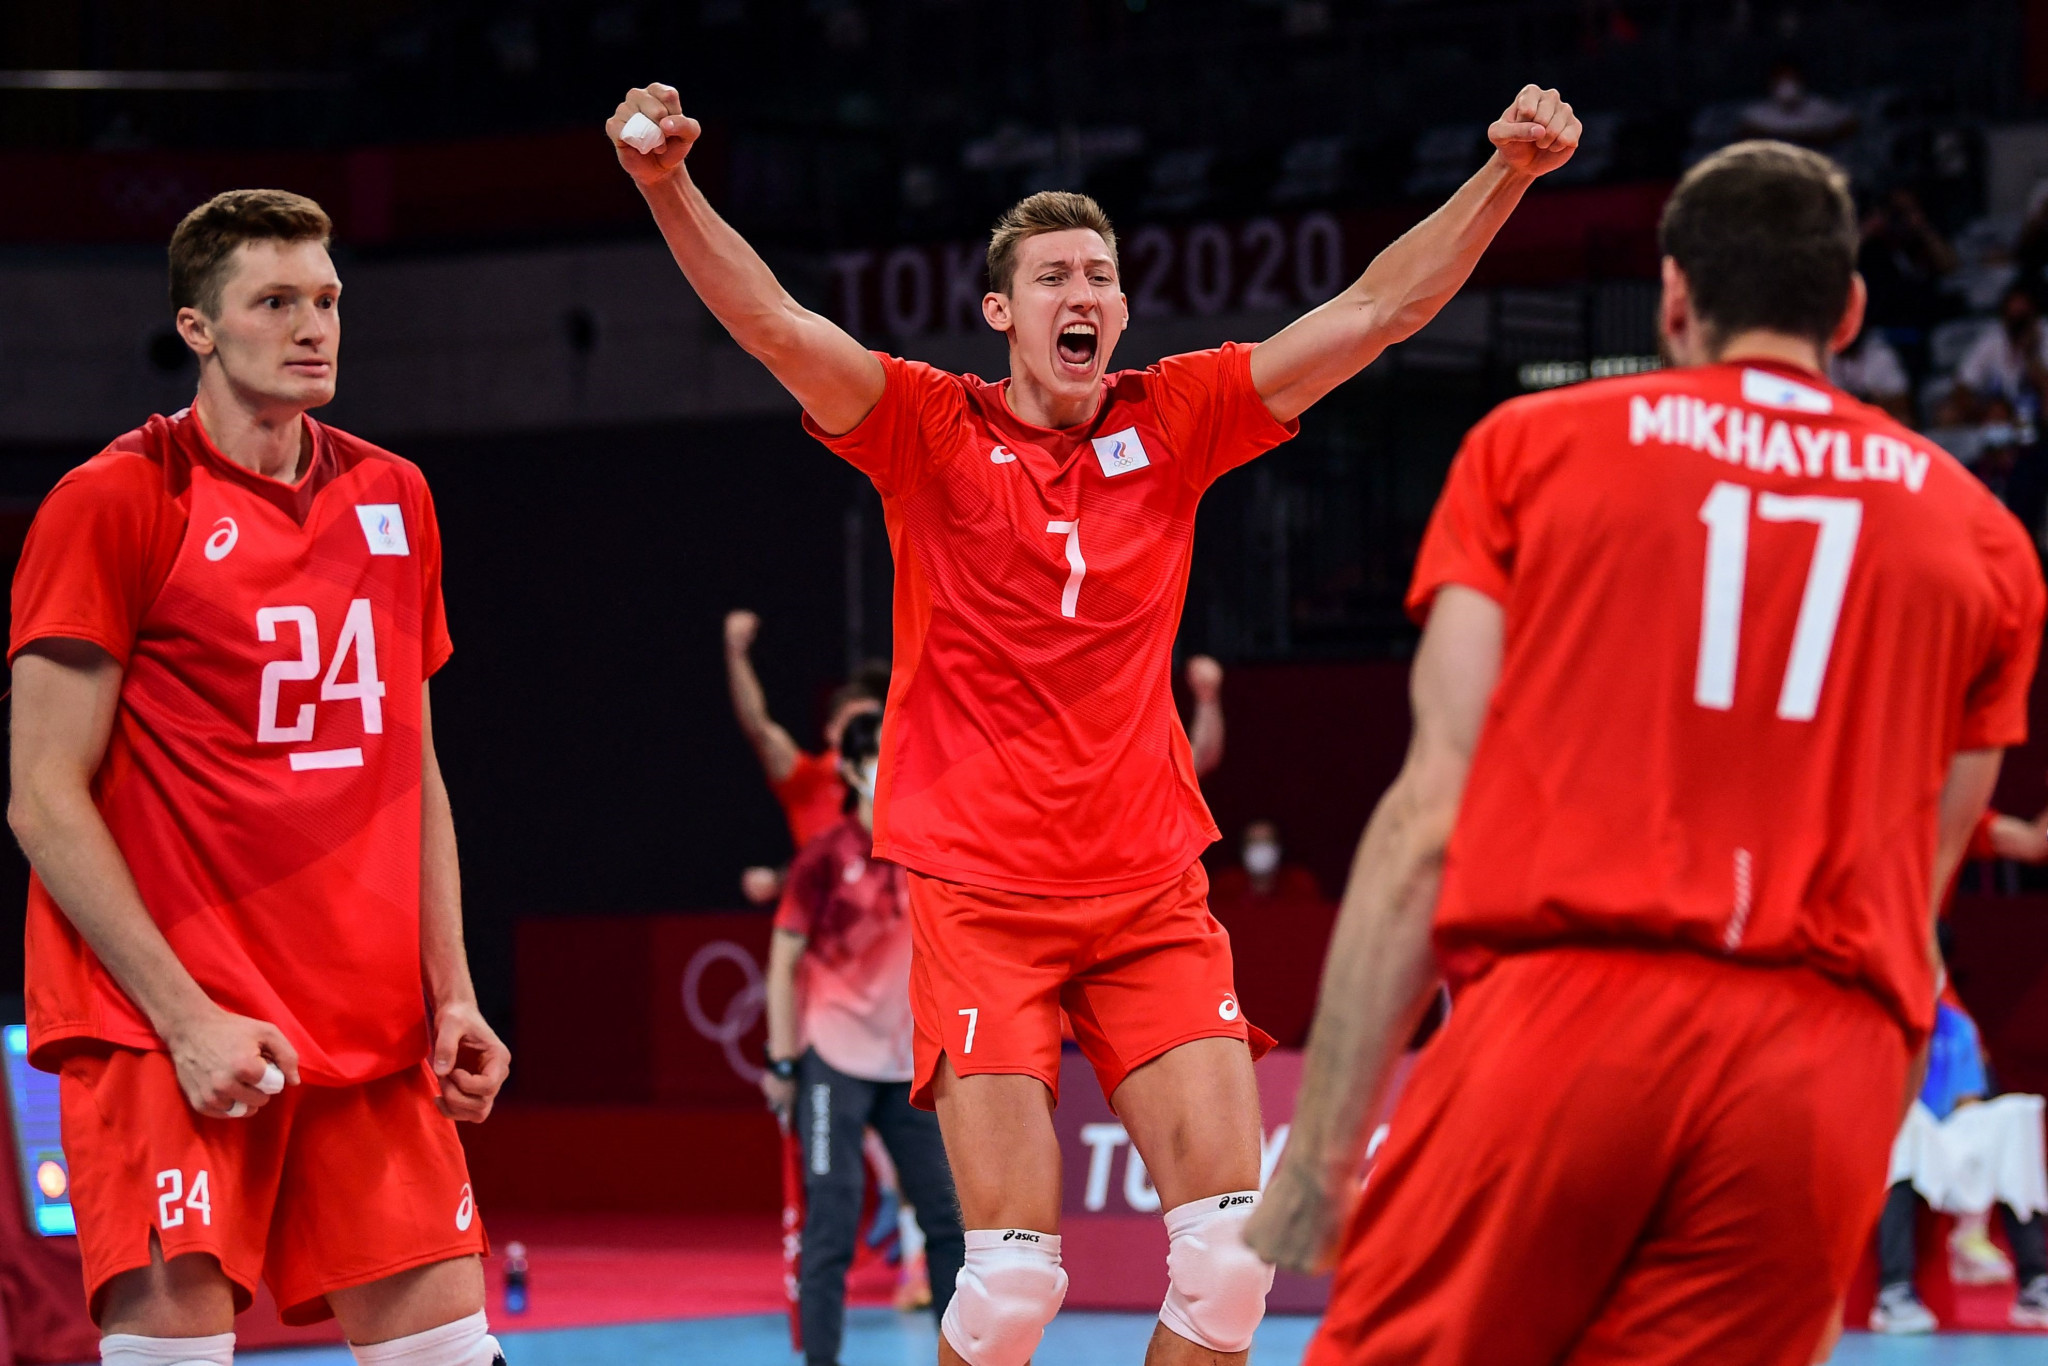 A total of 10 cities including Russian capital Moscow were due to stage matches during this year's Volleyball Men's World Championship ©Getty Images